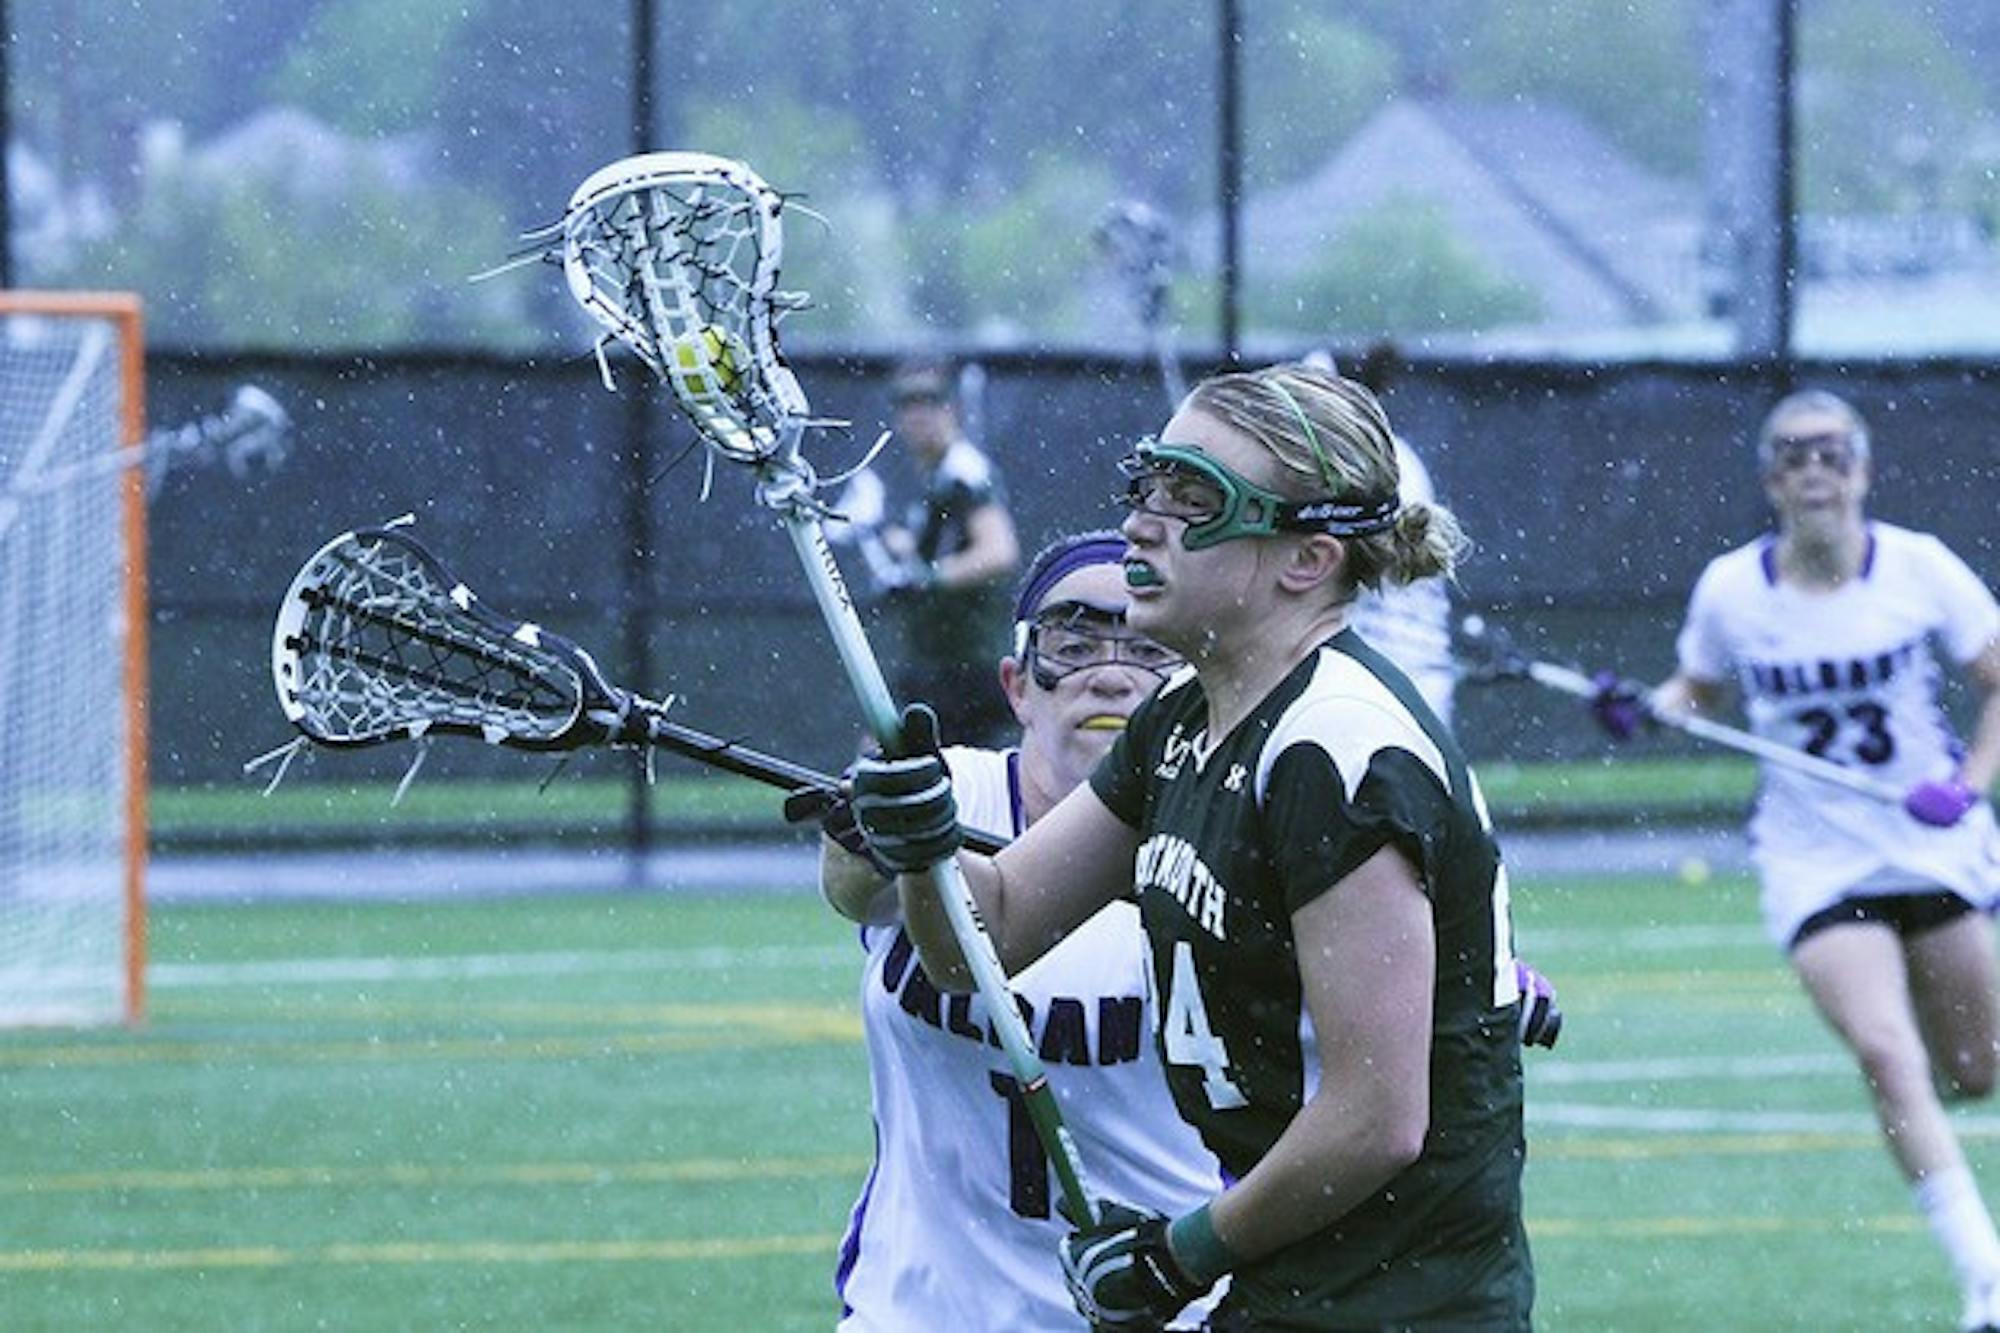 Women's lacrosse held off a second-half comeback by Brown University to secure the team's third conference victory of the season.